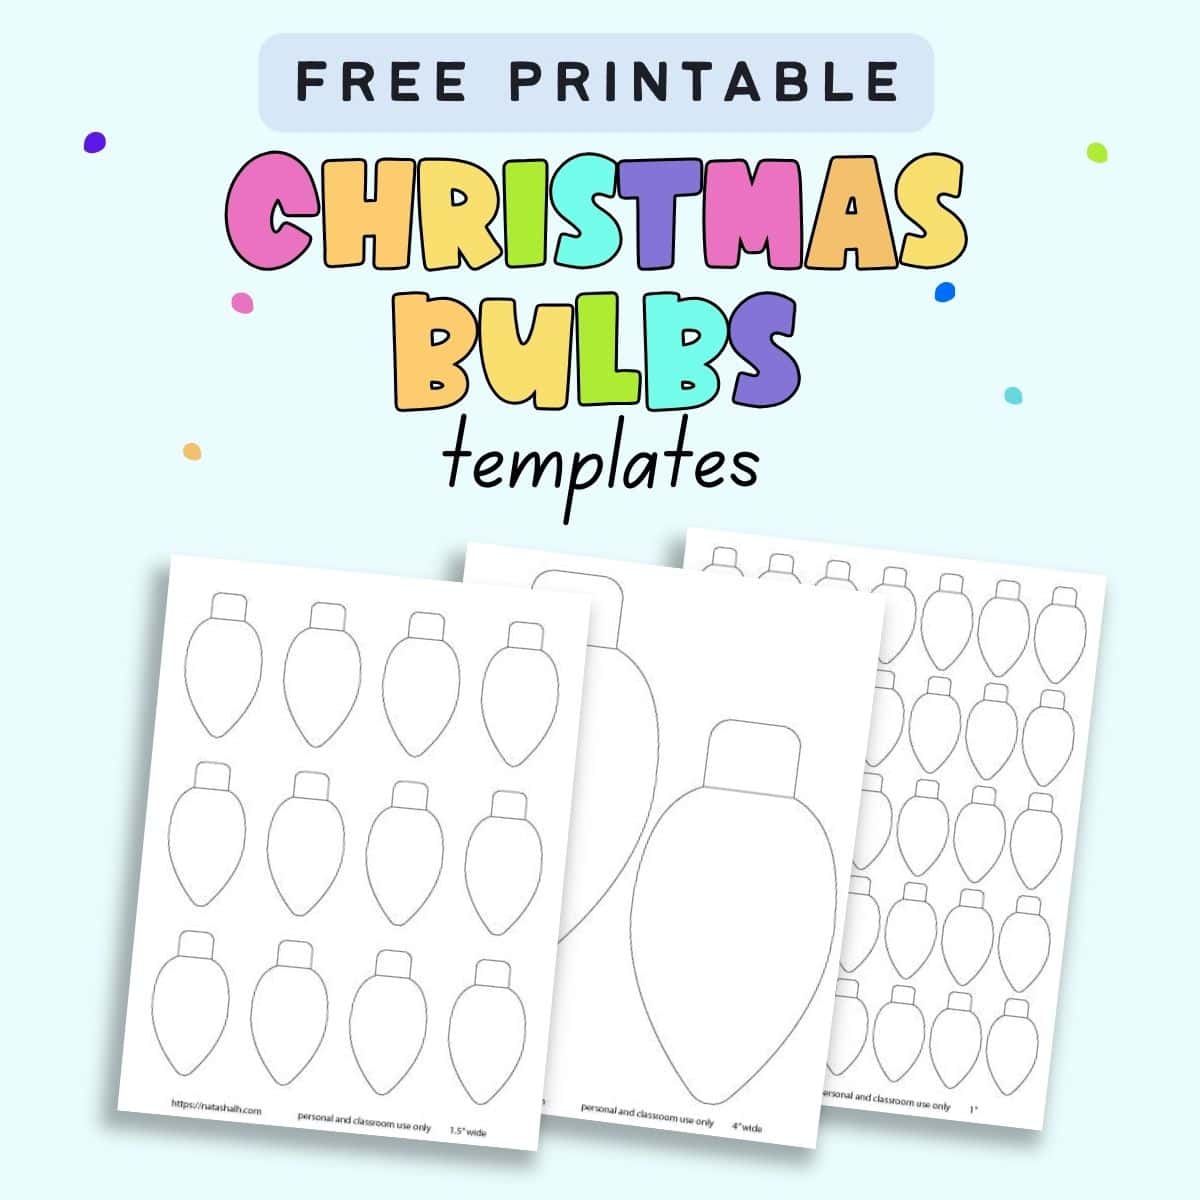 Text "free printable Christmas bulb templates" with a preview of three pages of printable Christmas light bulbs in three different sizes